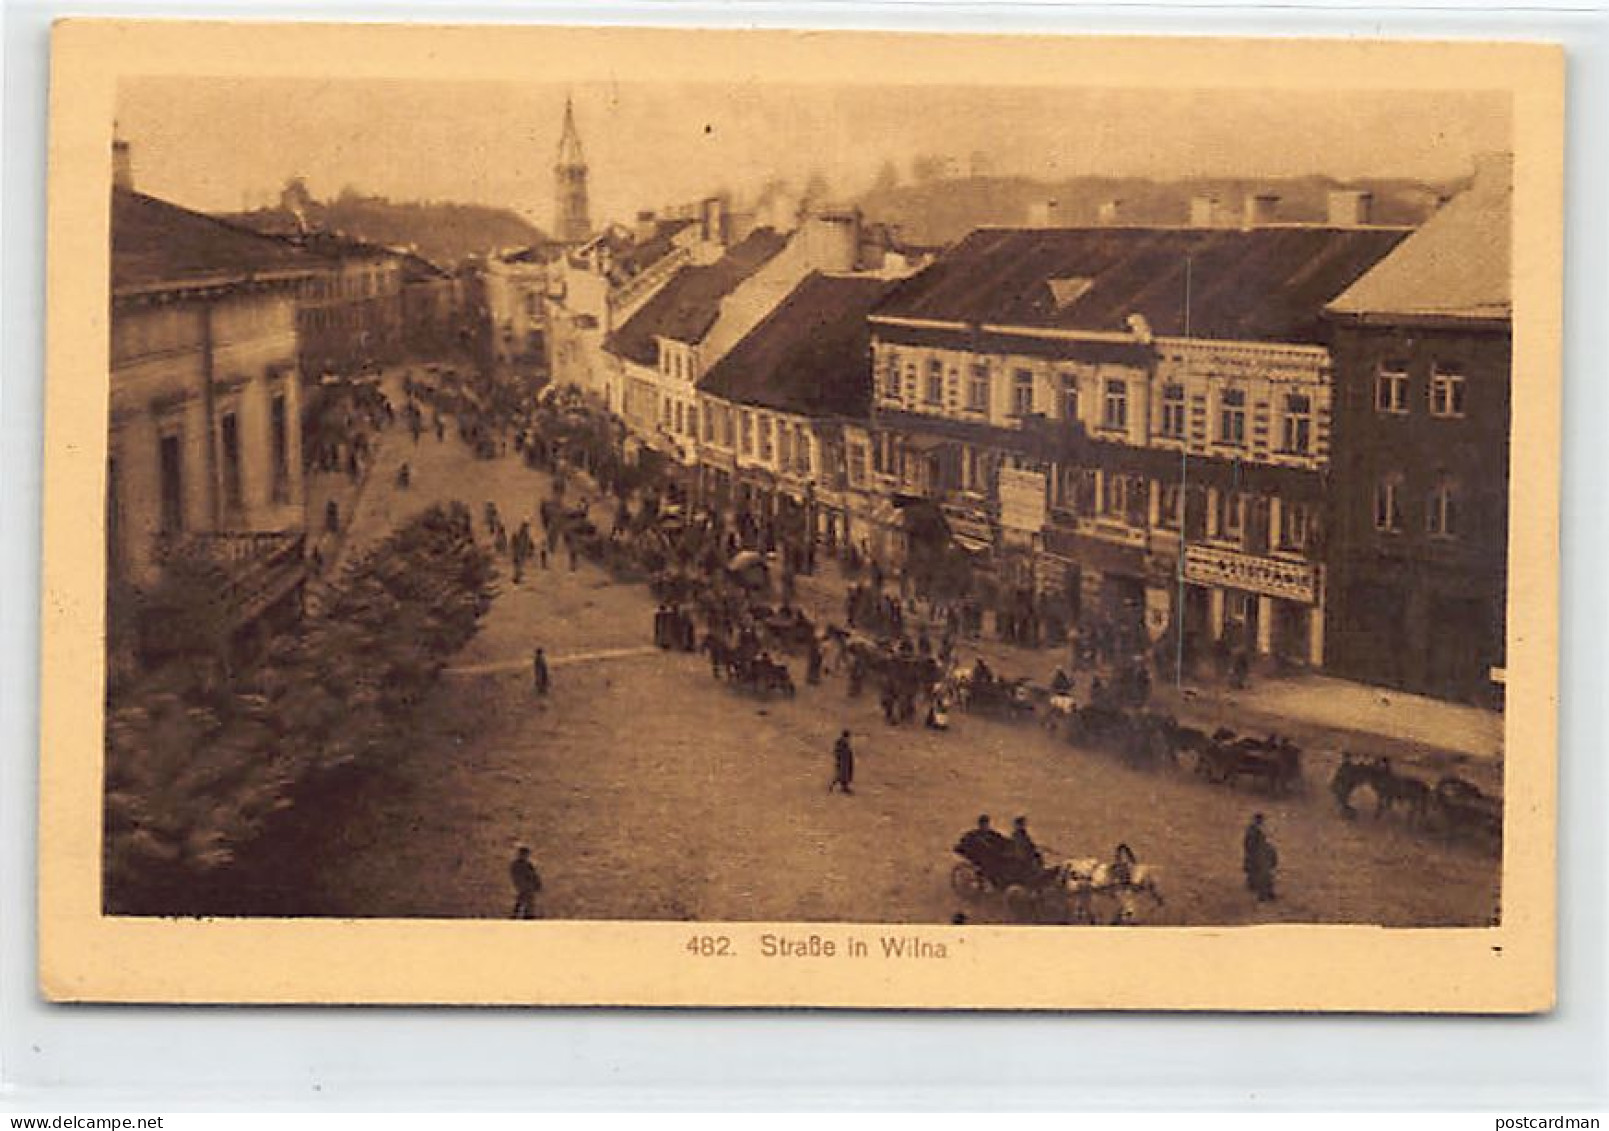 Lithuania - A Street In Vilnius During World War One (under German Occupation) - Lithuania